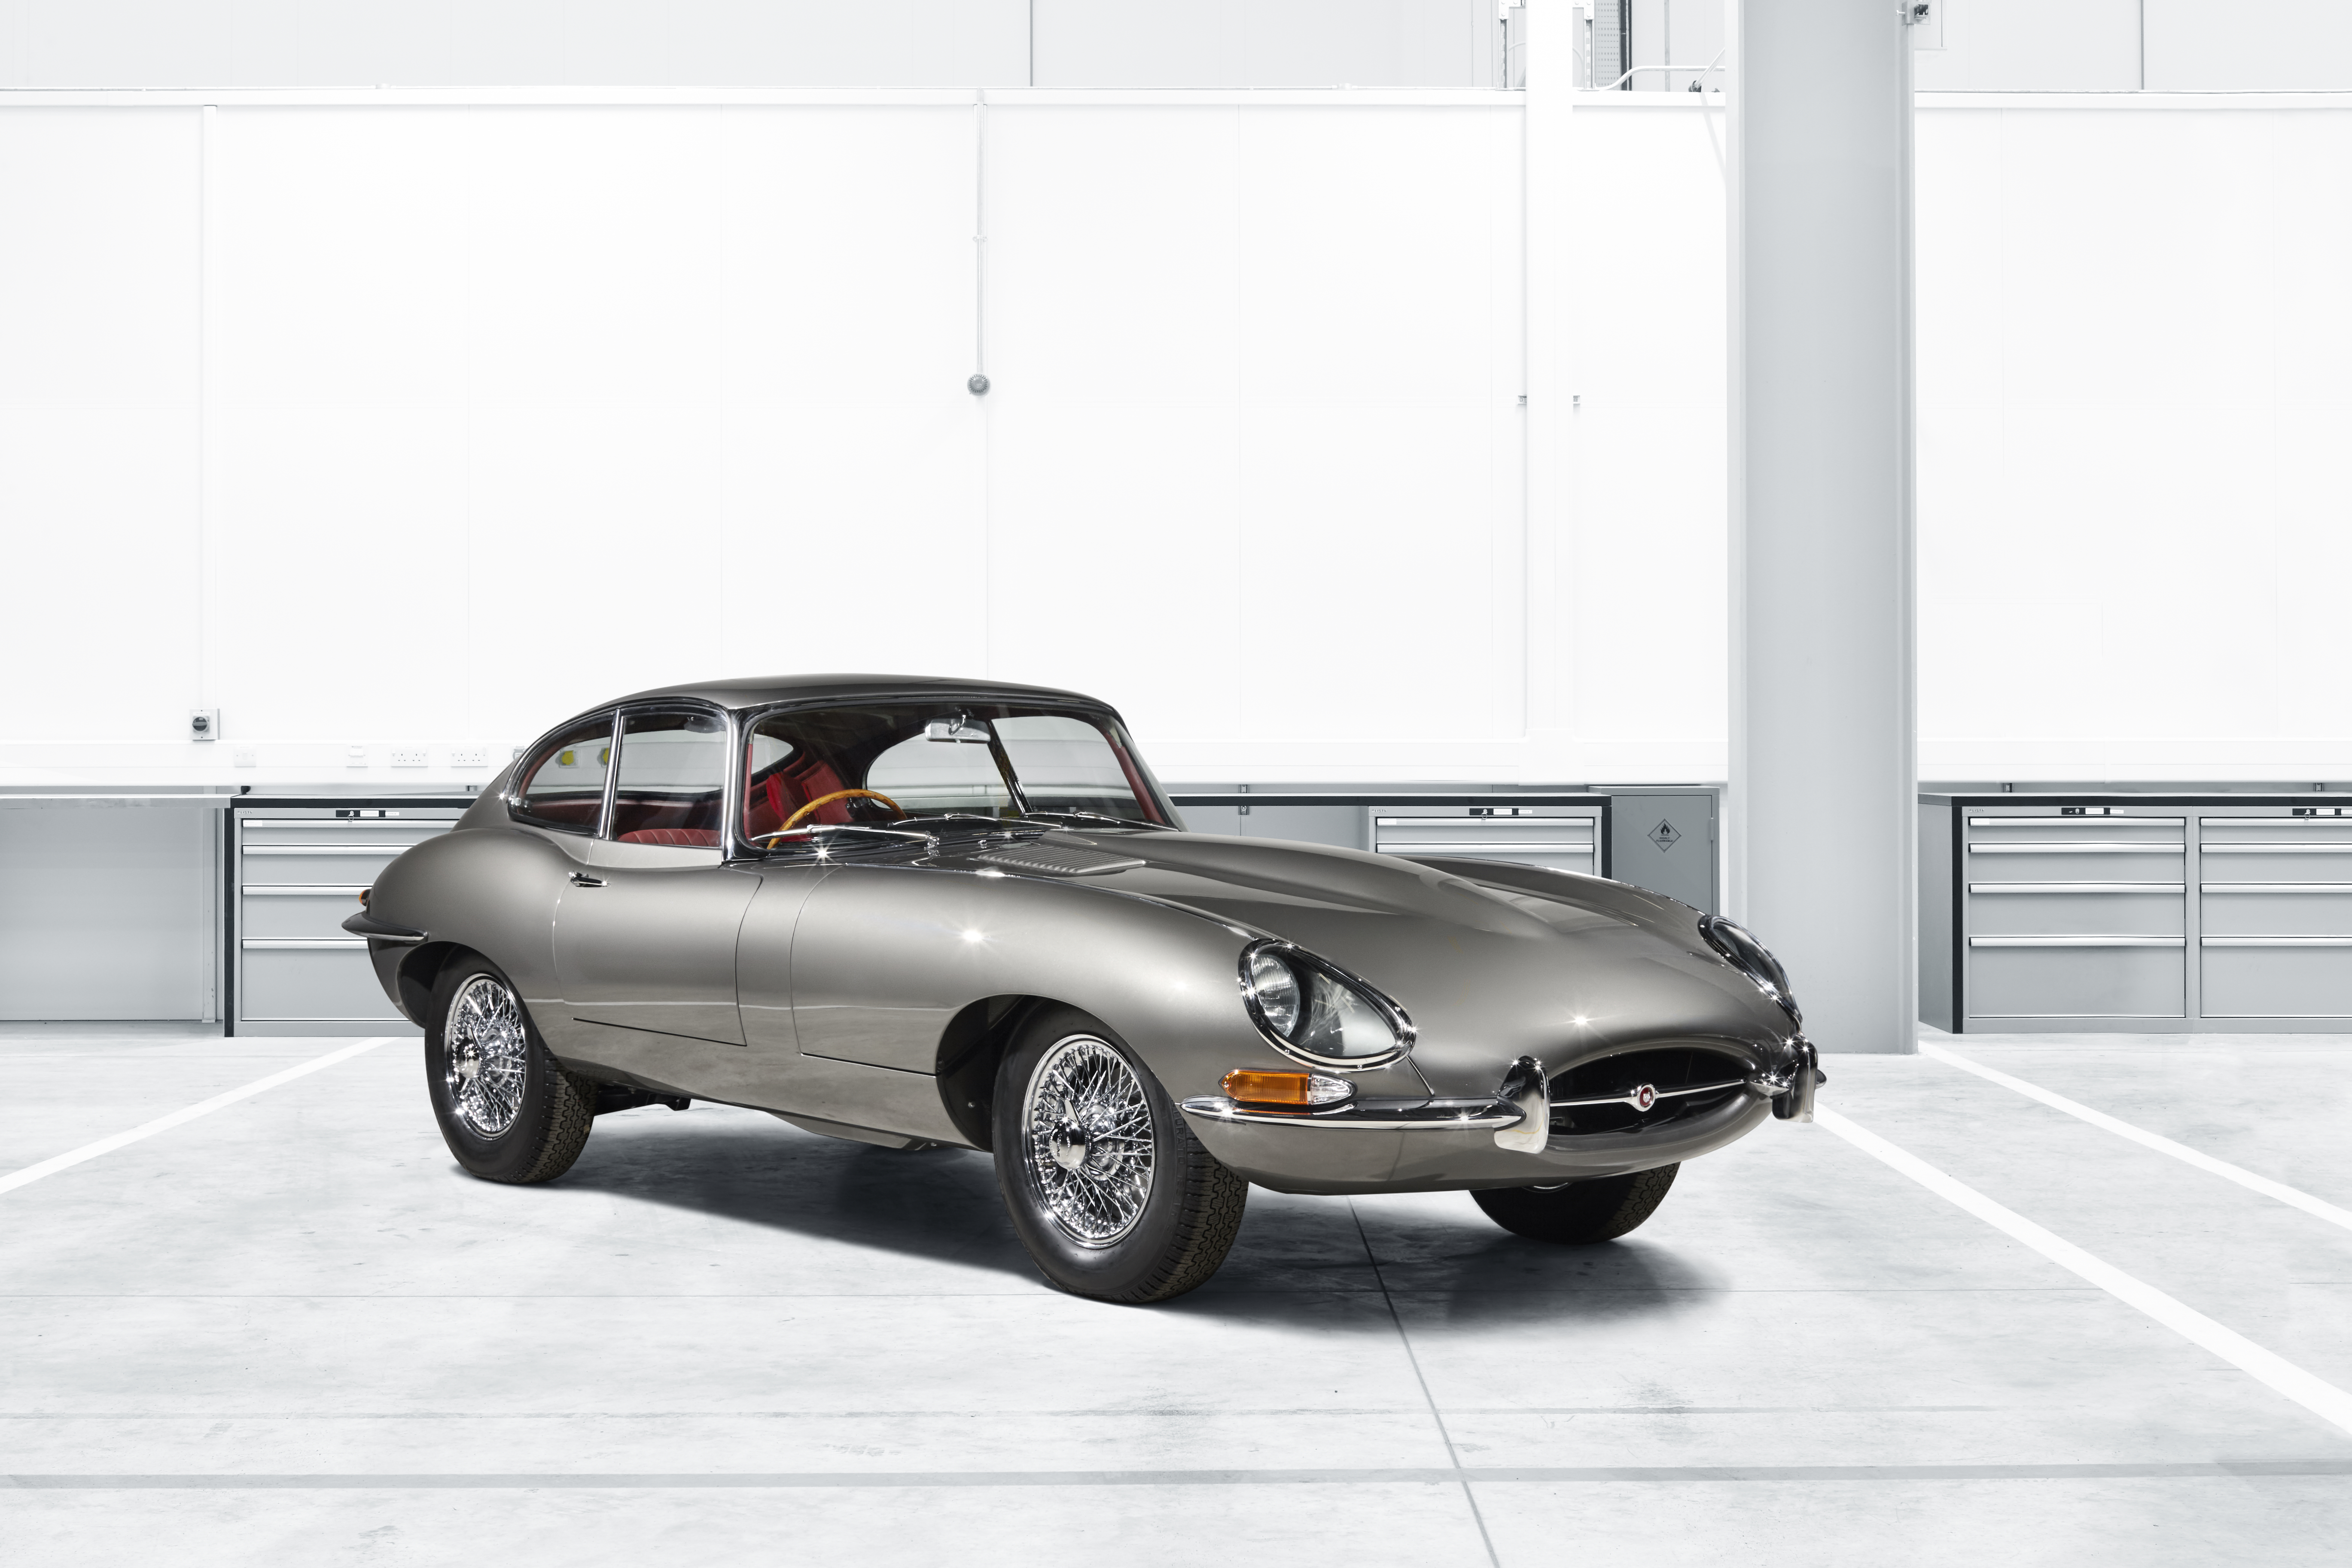 The E-Type combined performance and elegant looks